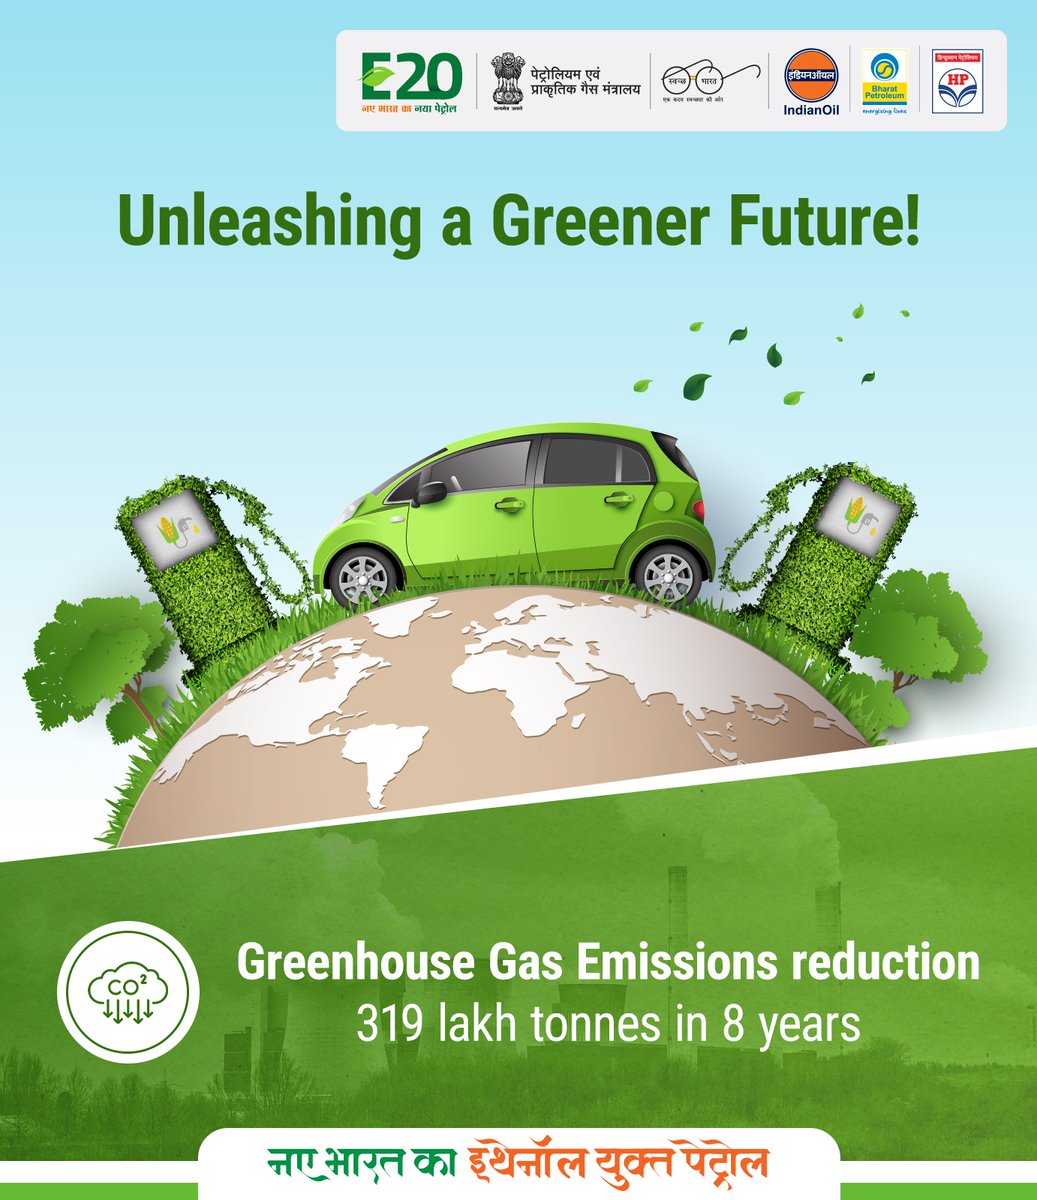 A Huge Leap Towards a Greener Future! We are proud to announce a remarkable achievement of reducing greenhouse gas emissions by 319 lakh tonnes in just 8 years! 🌱 Together, we are making a significant impact in creating a more sustainable and eco-friendly world.